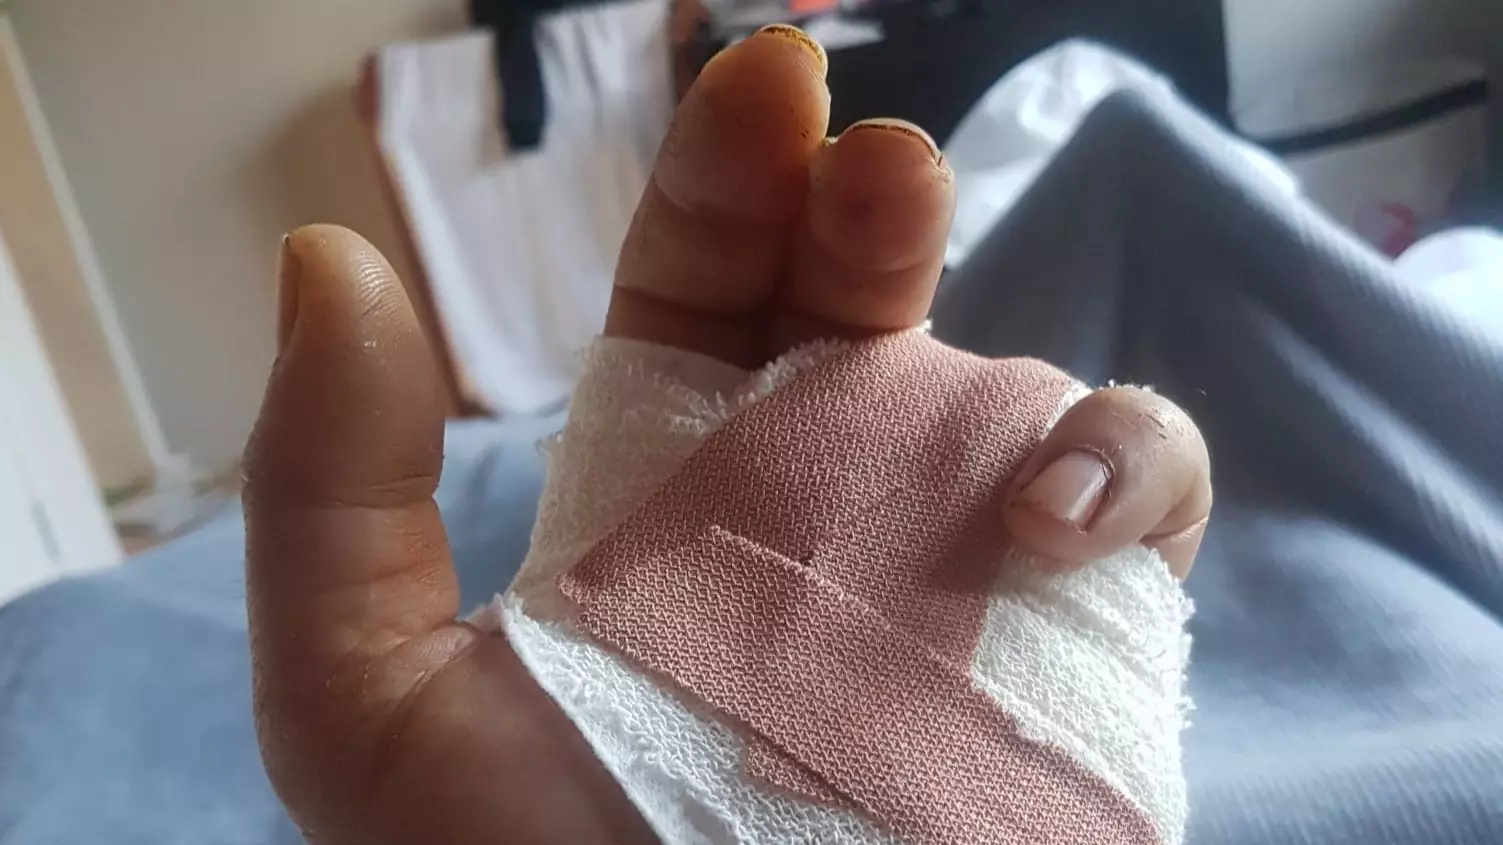 Aussie Says His Wedding Ring Ripped His Finger Clean Off After Nasty Fall